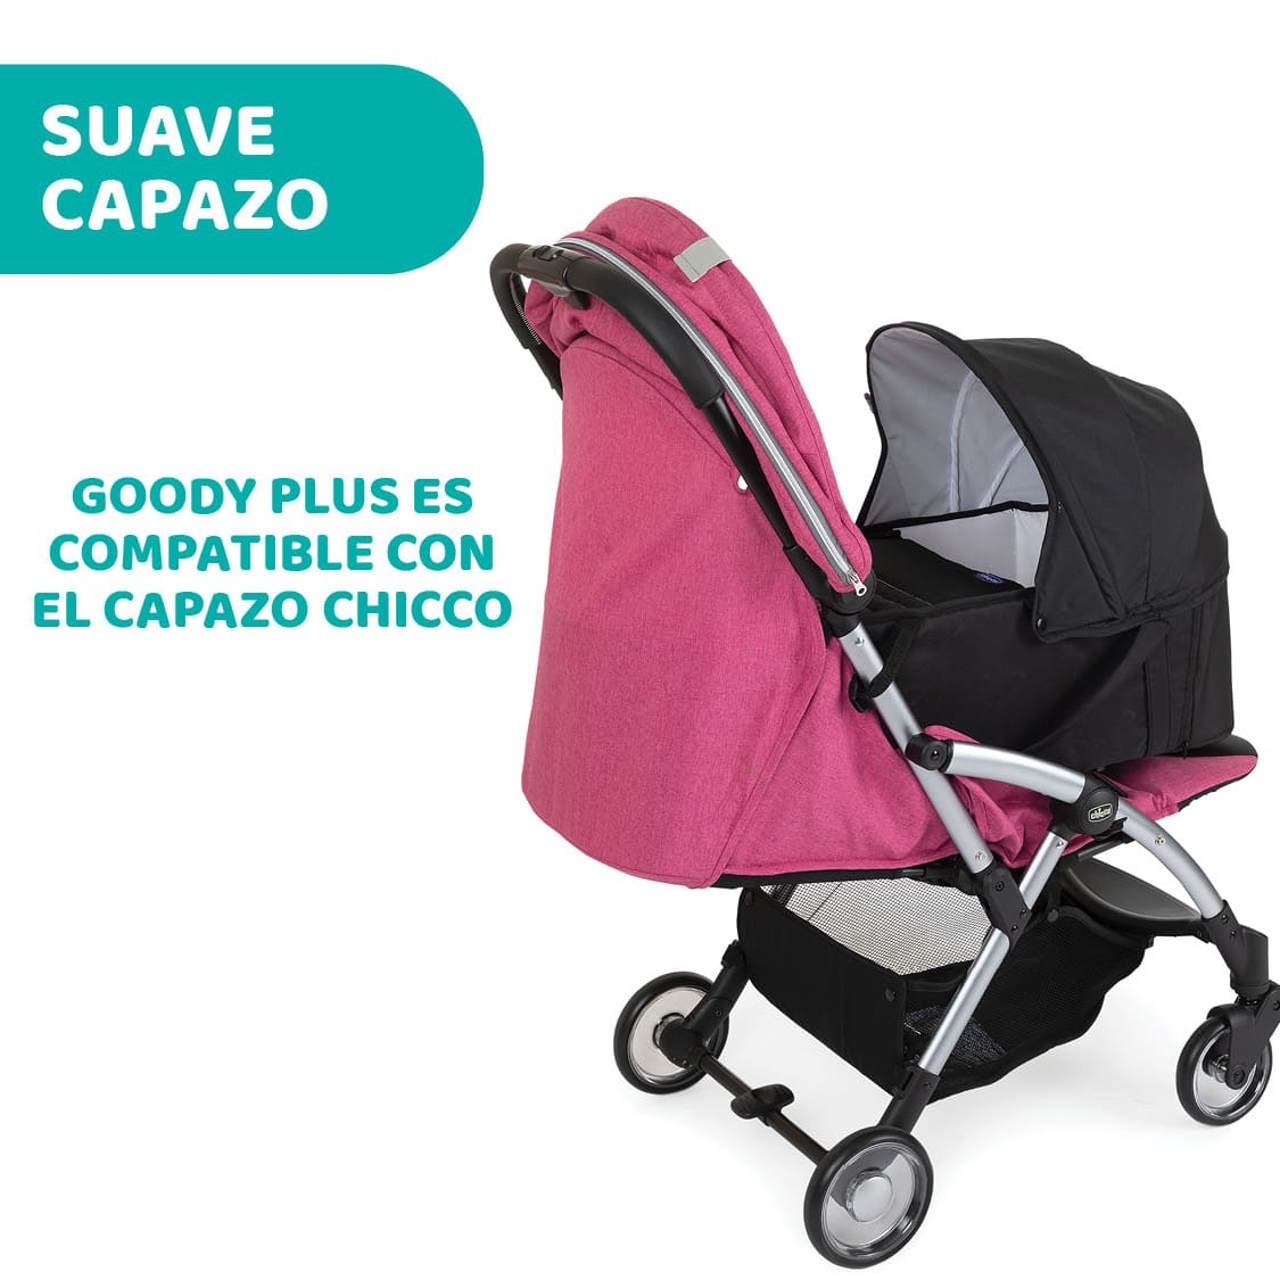 Goody Plus Silla de paseo image number 11